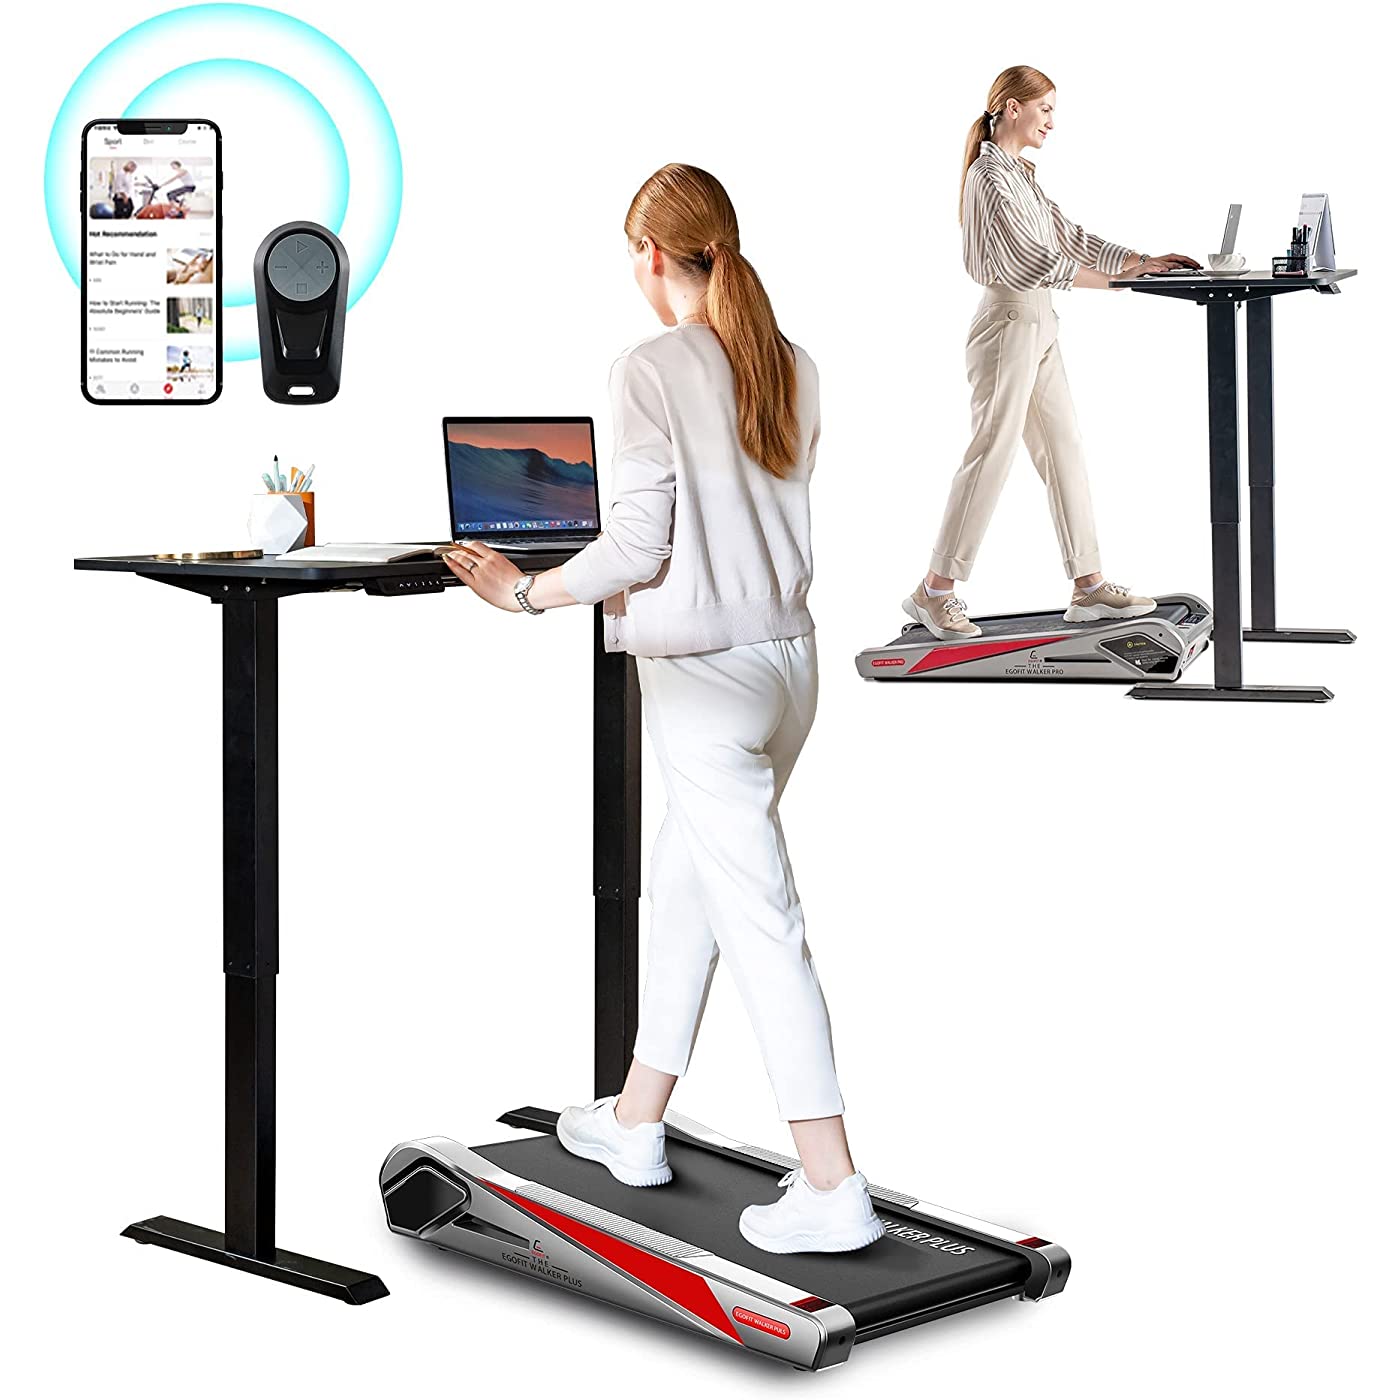 HouseFit Under Desk Treadmill with Bluetooth APP for Walking and Running Mode 2 in 1 Small Treadmill for Apartment with iPad and Phone Support LCD Display 